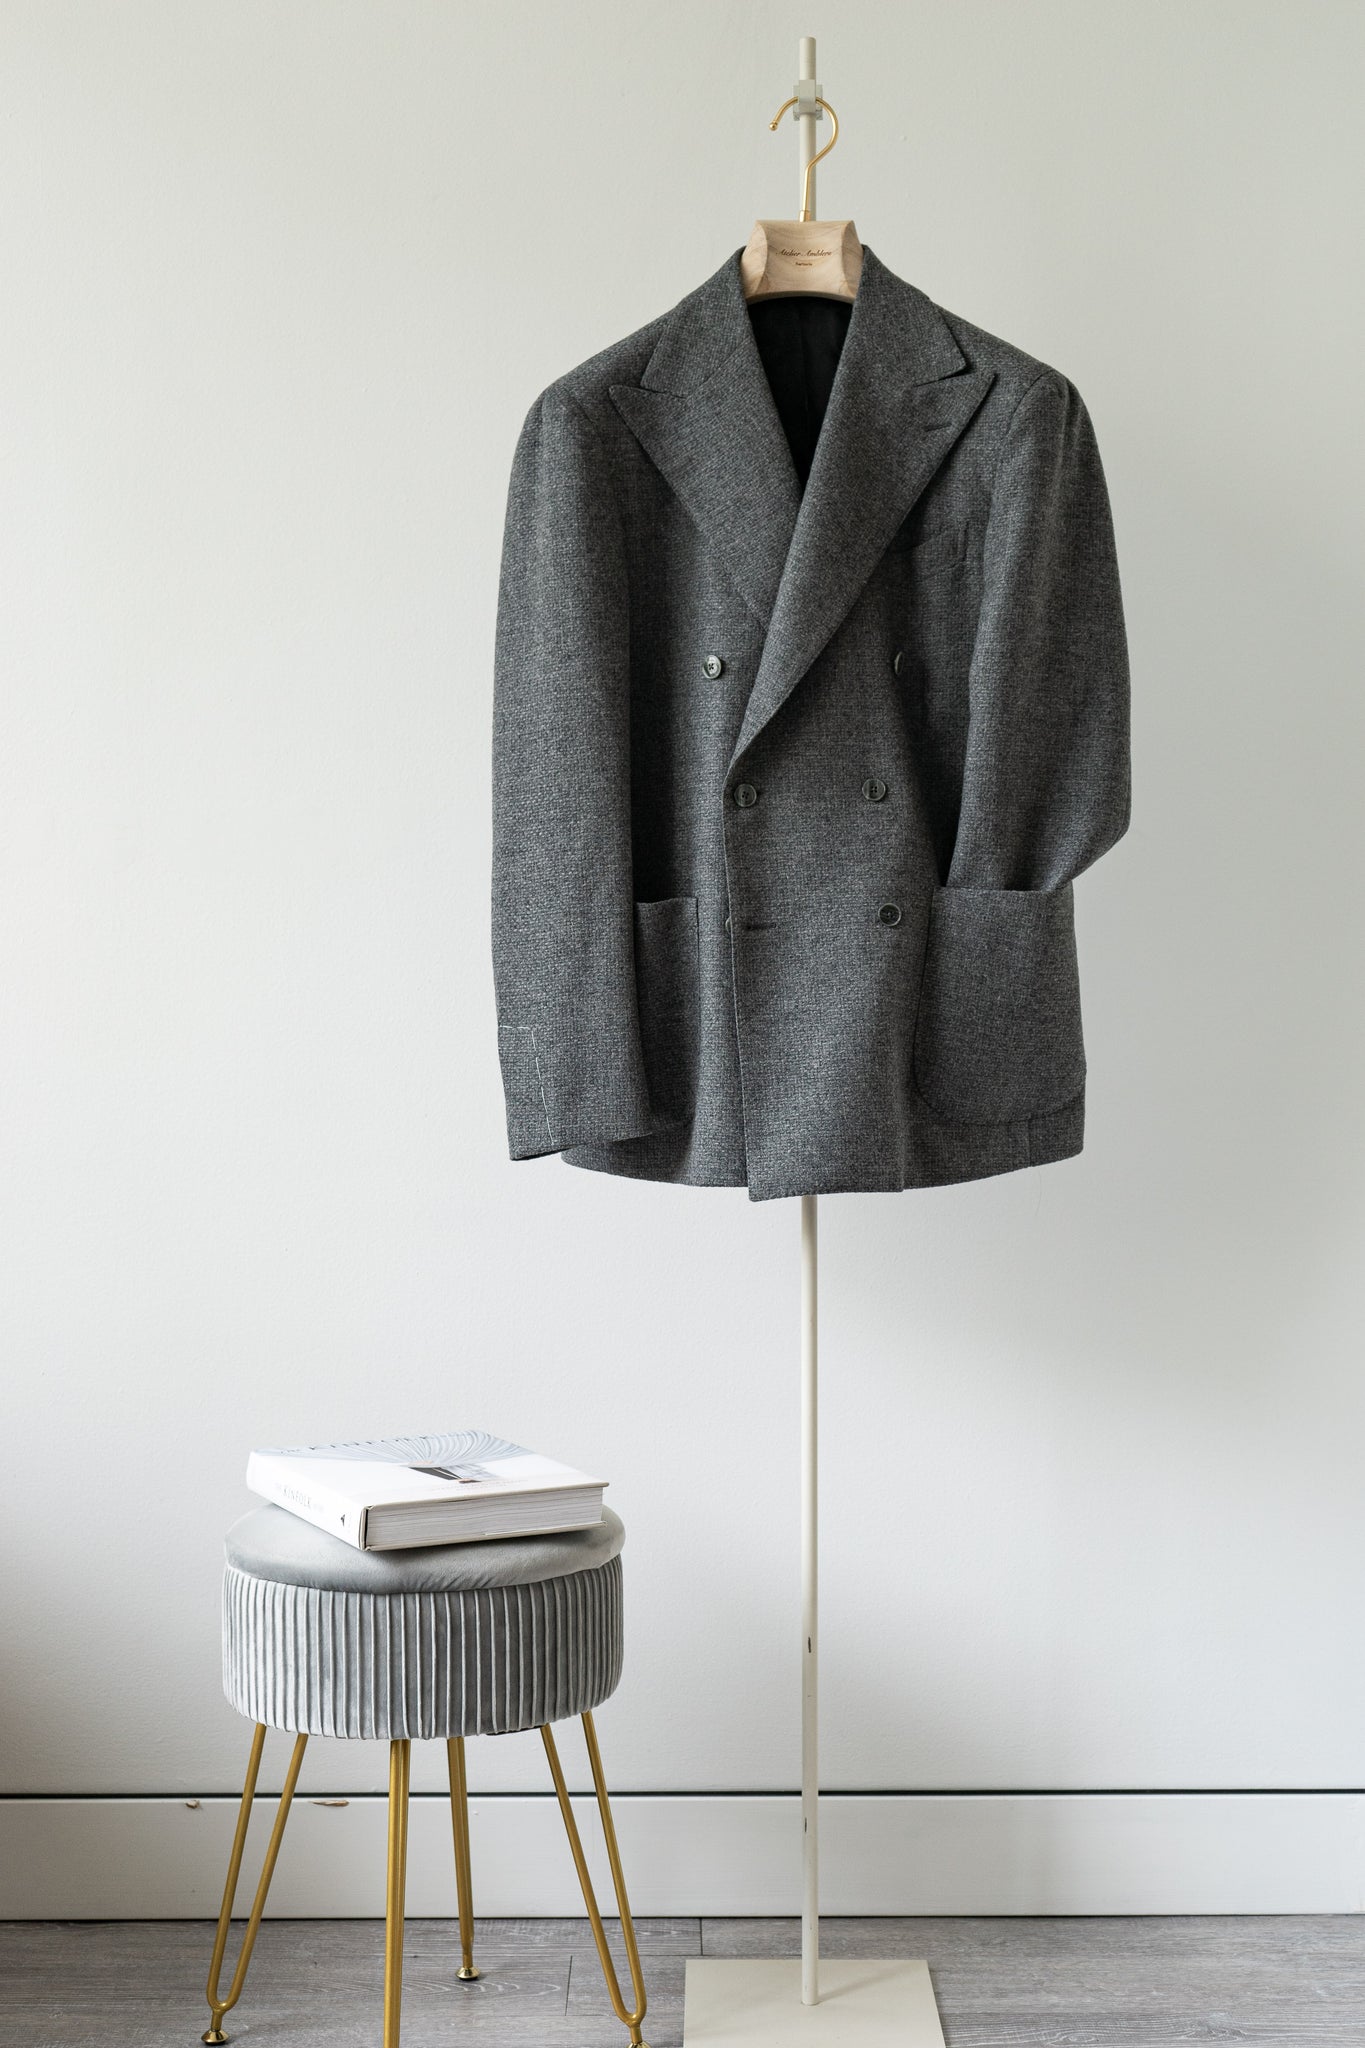 Medium Grey Virgin Wool and Cashmere Double Breasted Sport Jackets